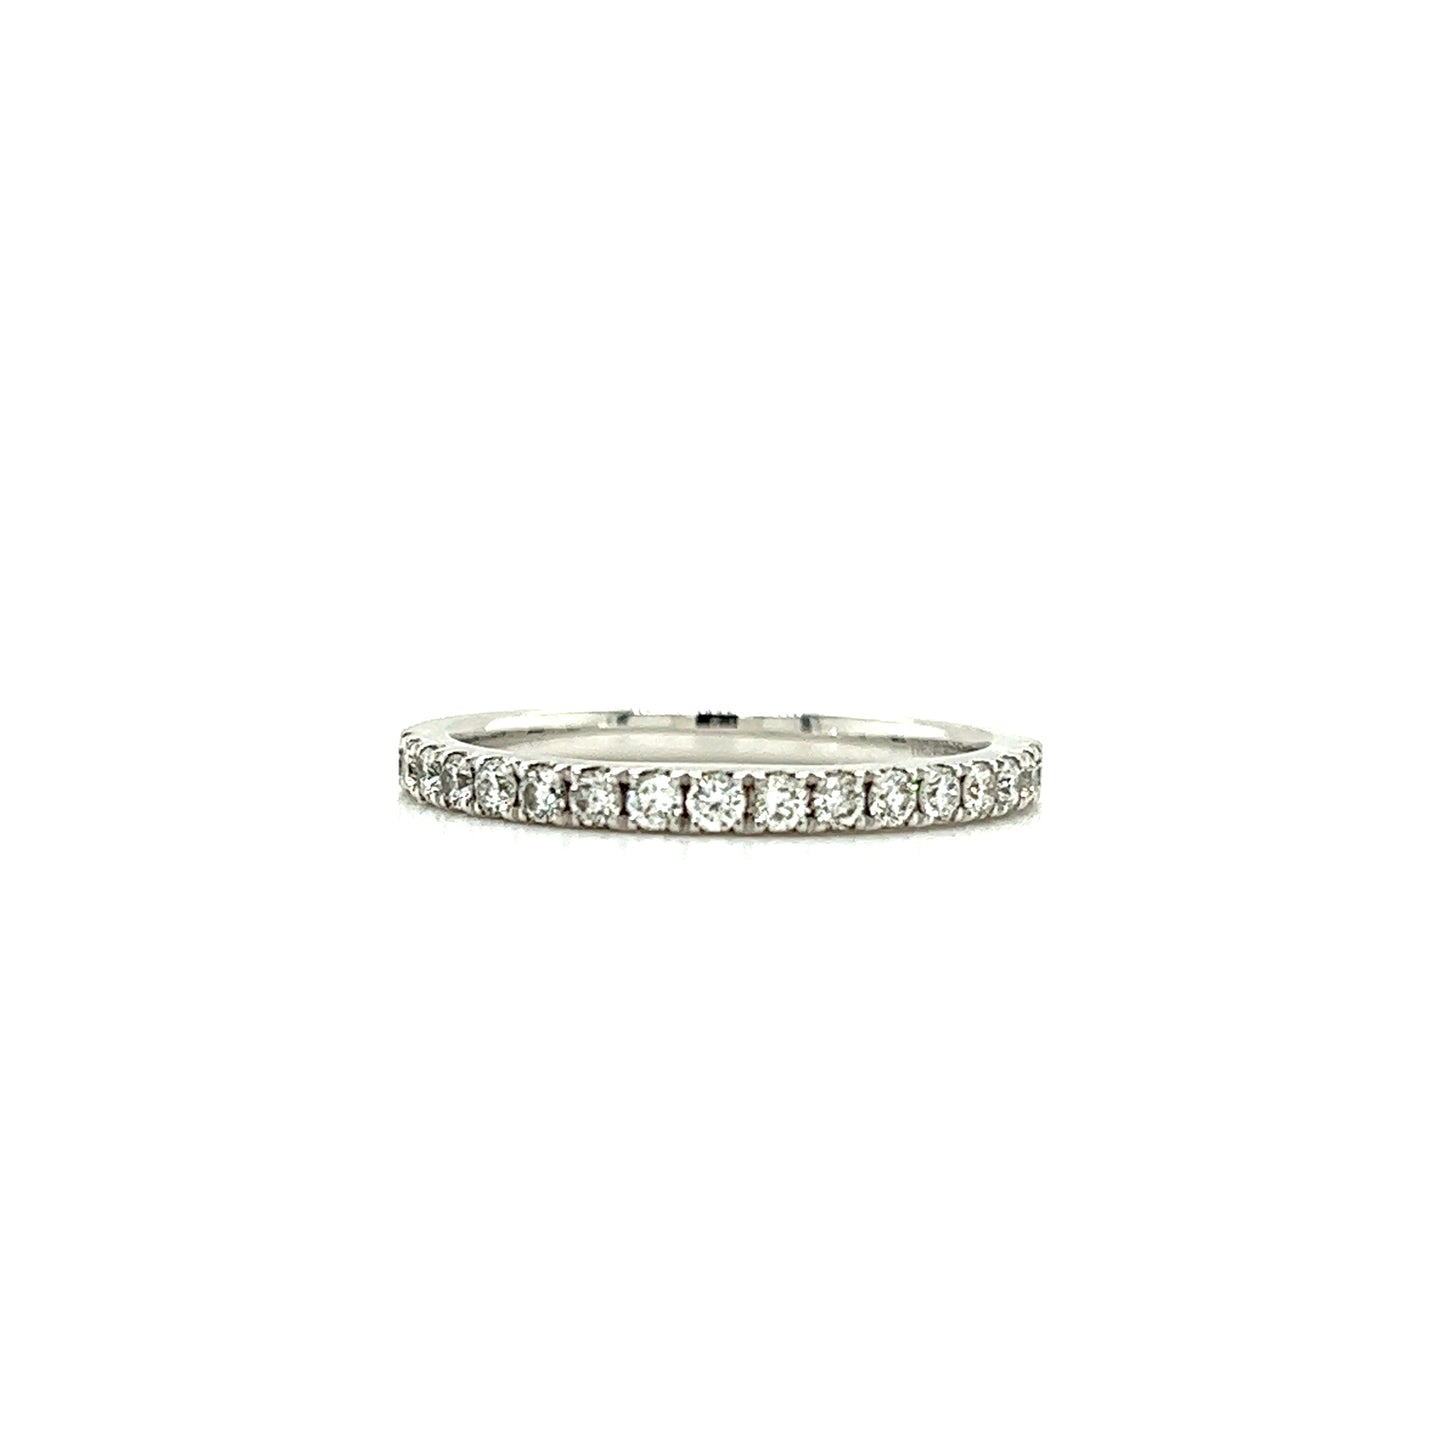 Diamond Ring with 0.36ctw of Diamonds in 14K White Gold Front View.